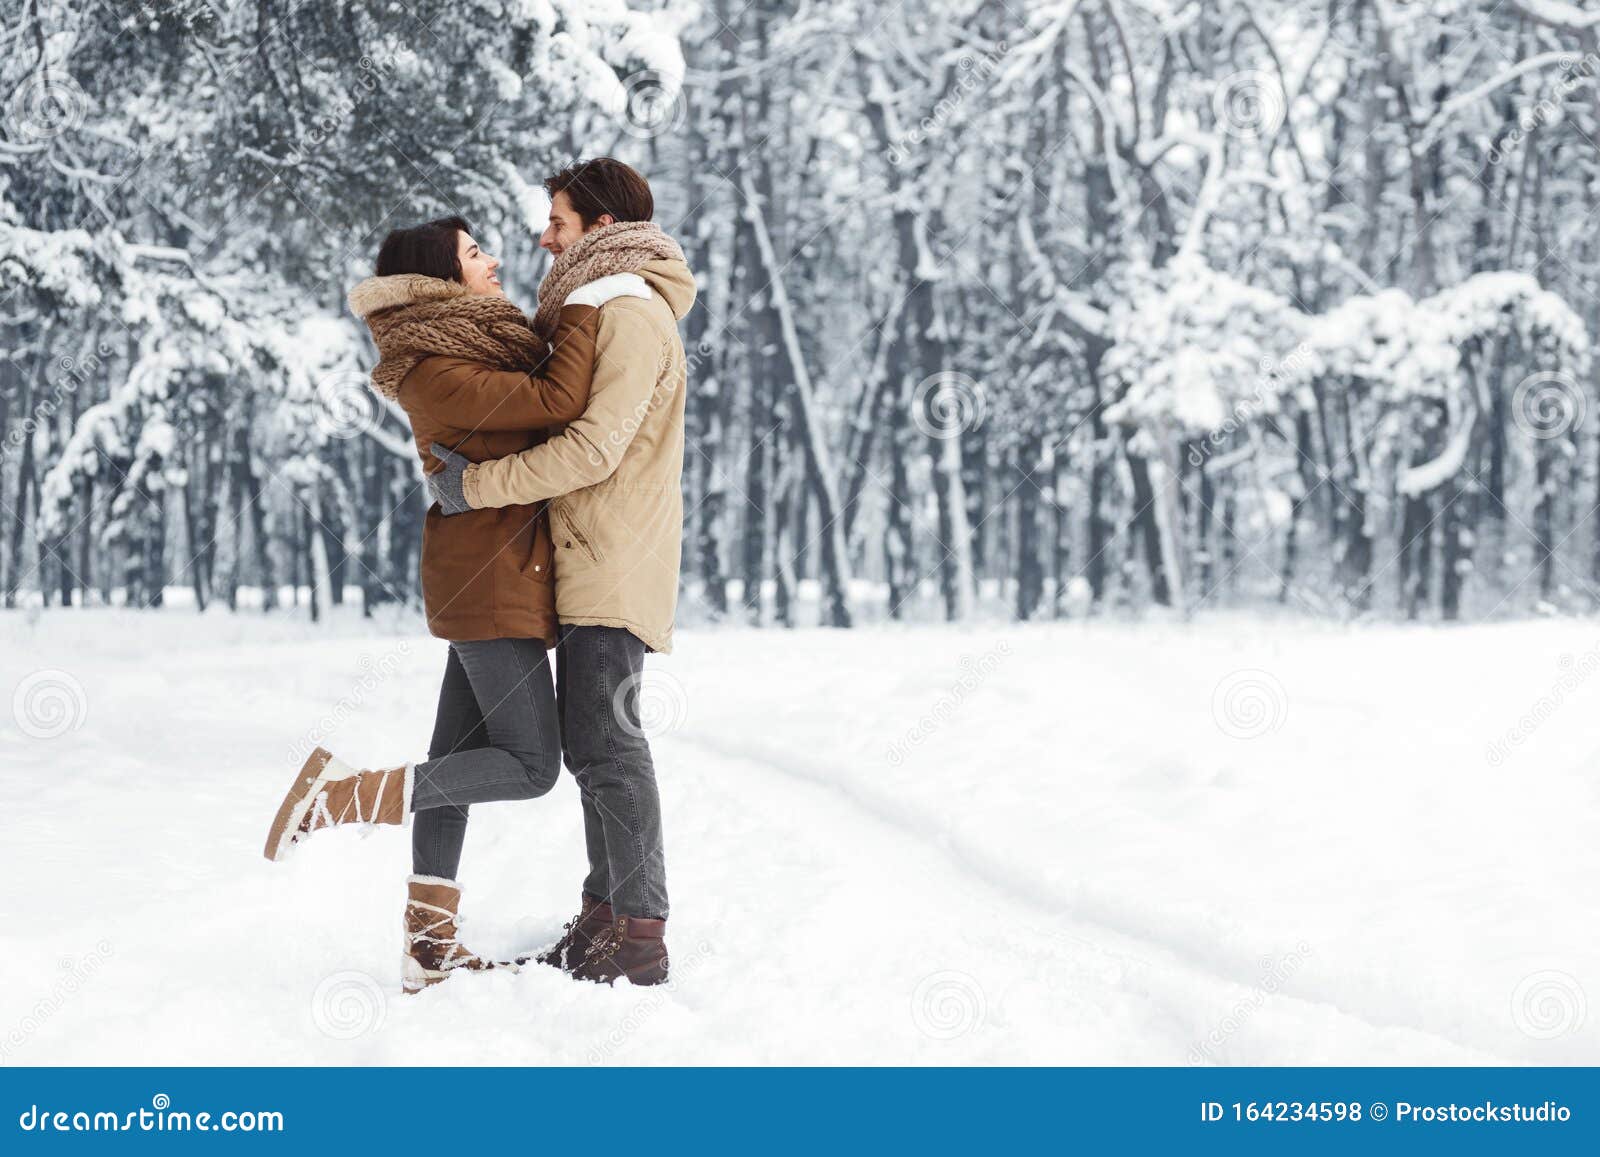 couple embracing standing in snowy winter forest in the morning